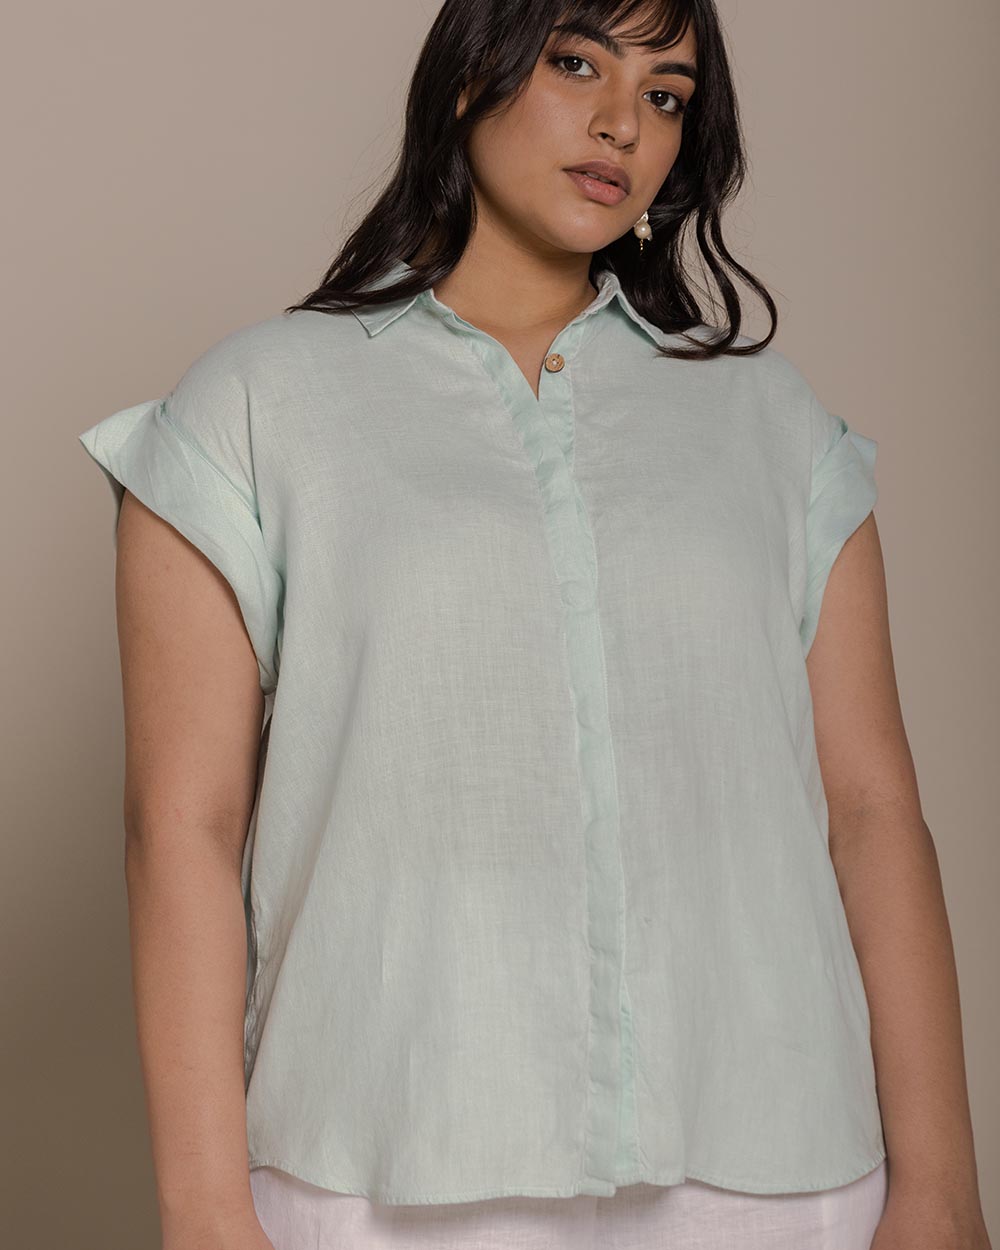 Chasing Daydreams Shirt - Sage Mint-OOS at Kamakhyaa by Reistor. This item is Green, Hemp, Natural, Office Wear, Solids, T-Shirts, Tops, Tunic Tops, Womenswear